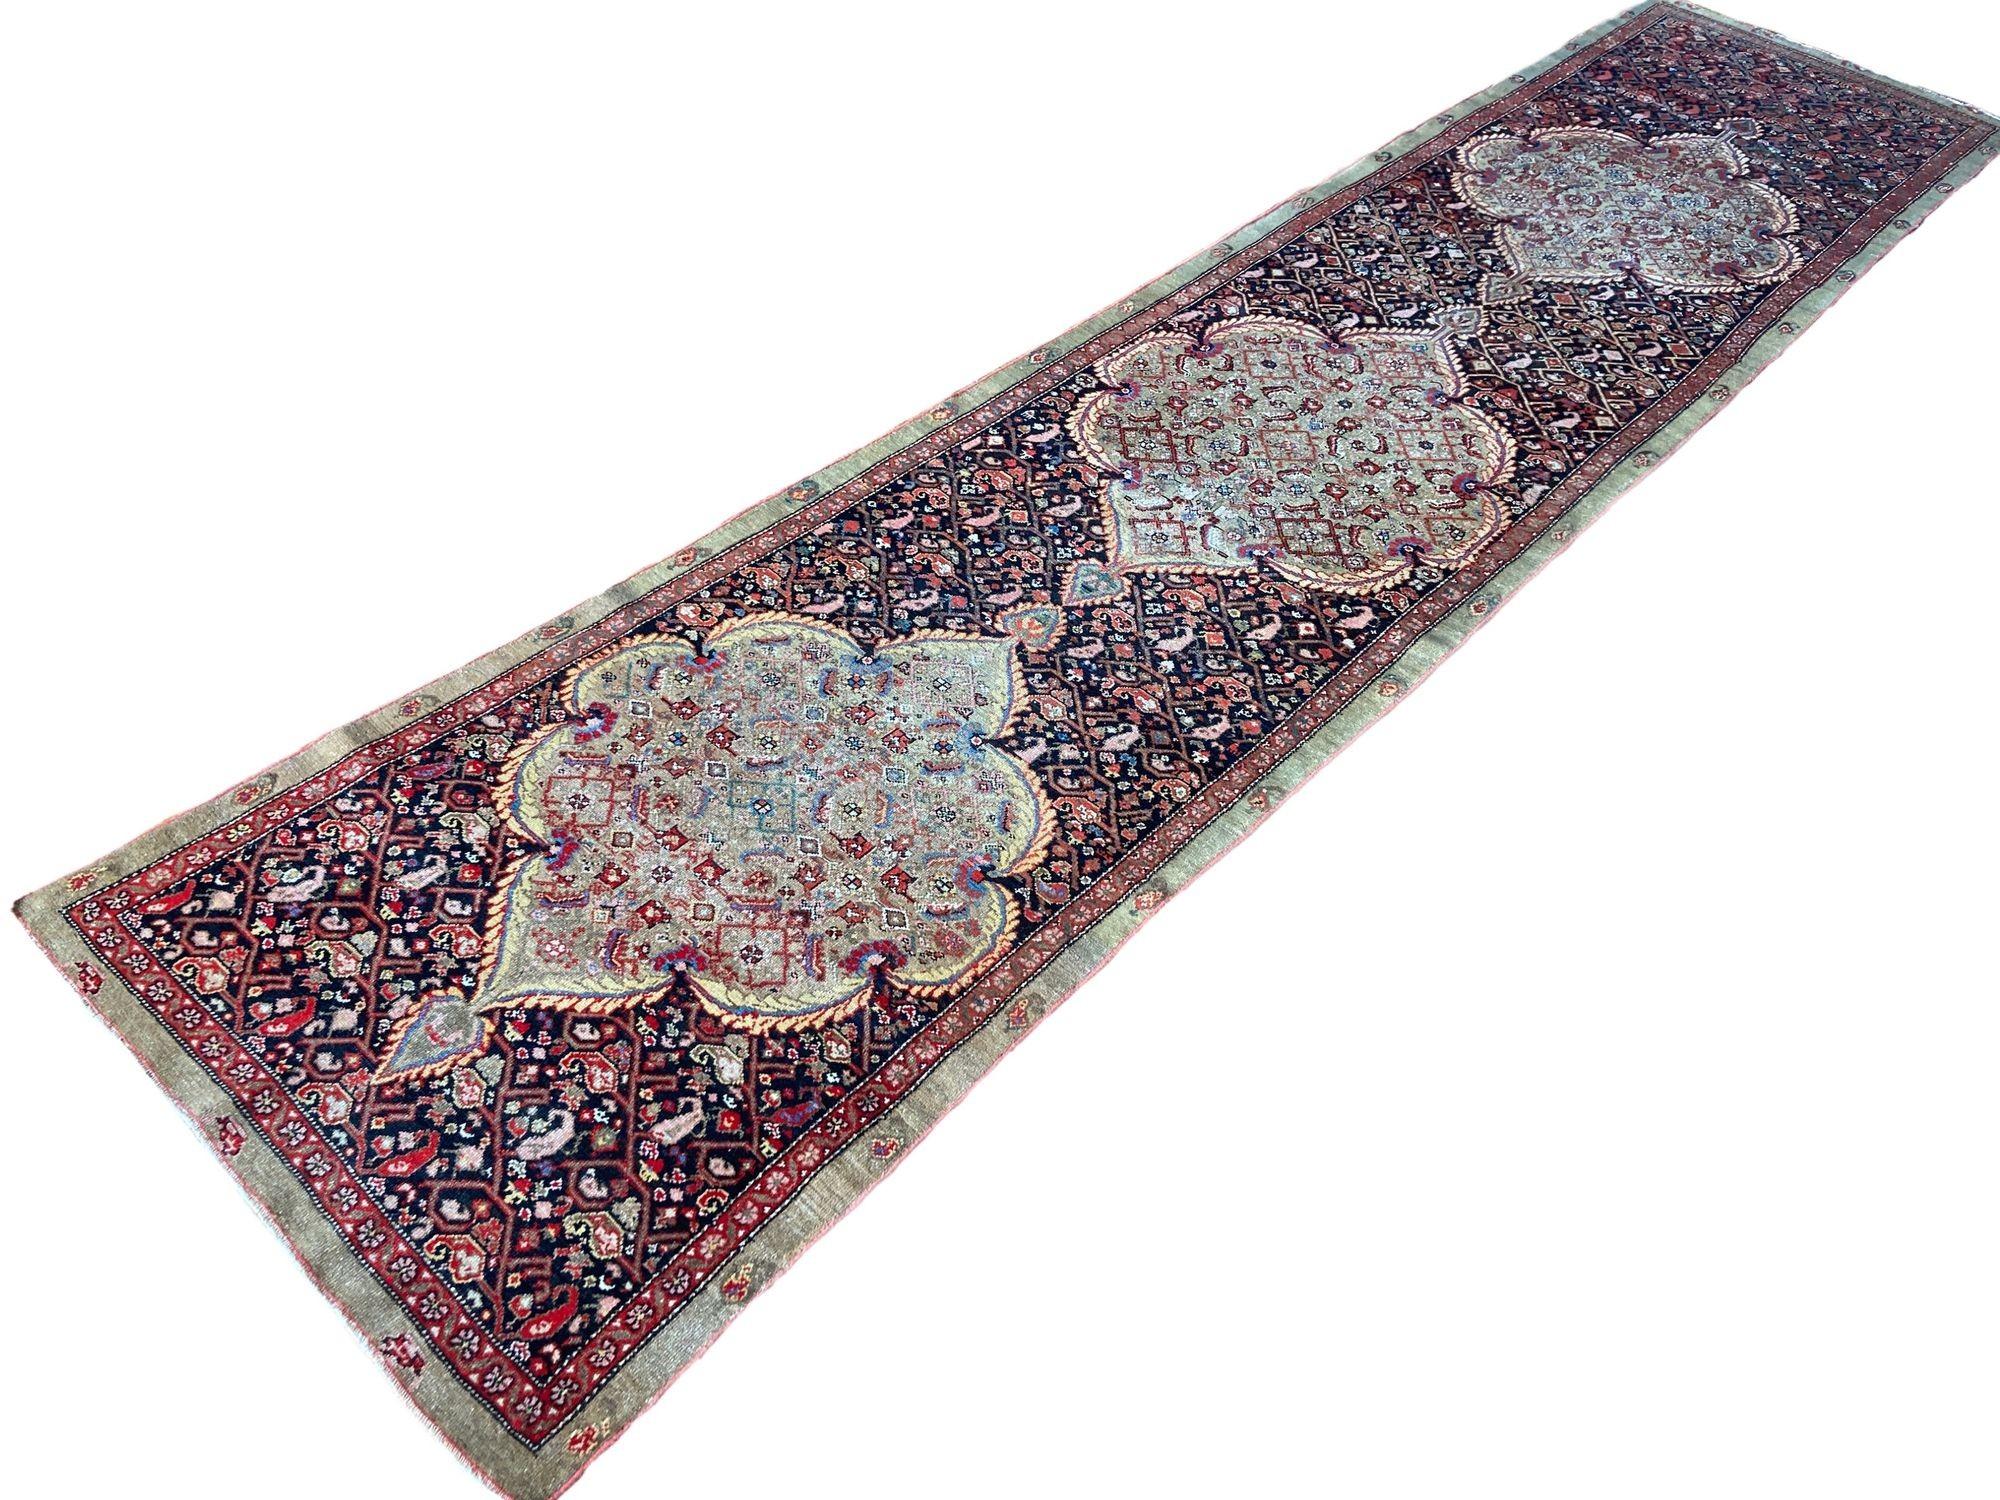 Antique Malayer Runner 4.25m x 0.96m In Good Condition For Sale In St. Albans, GB